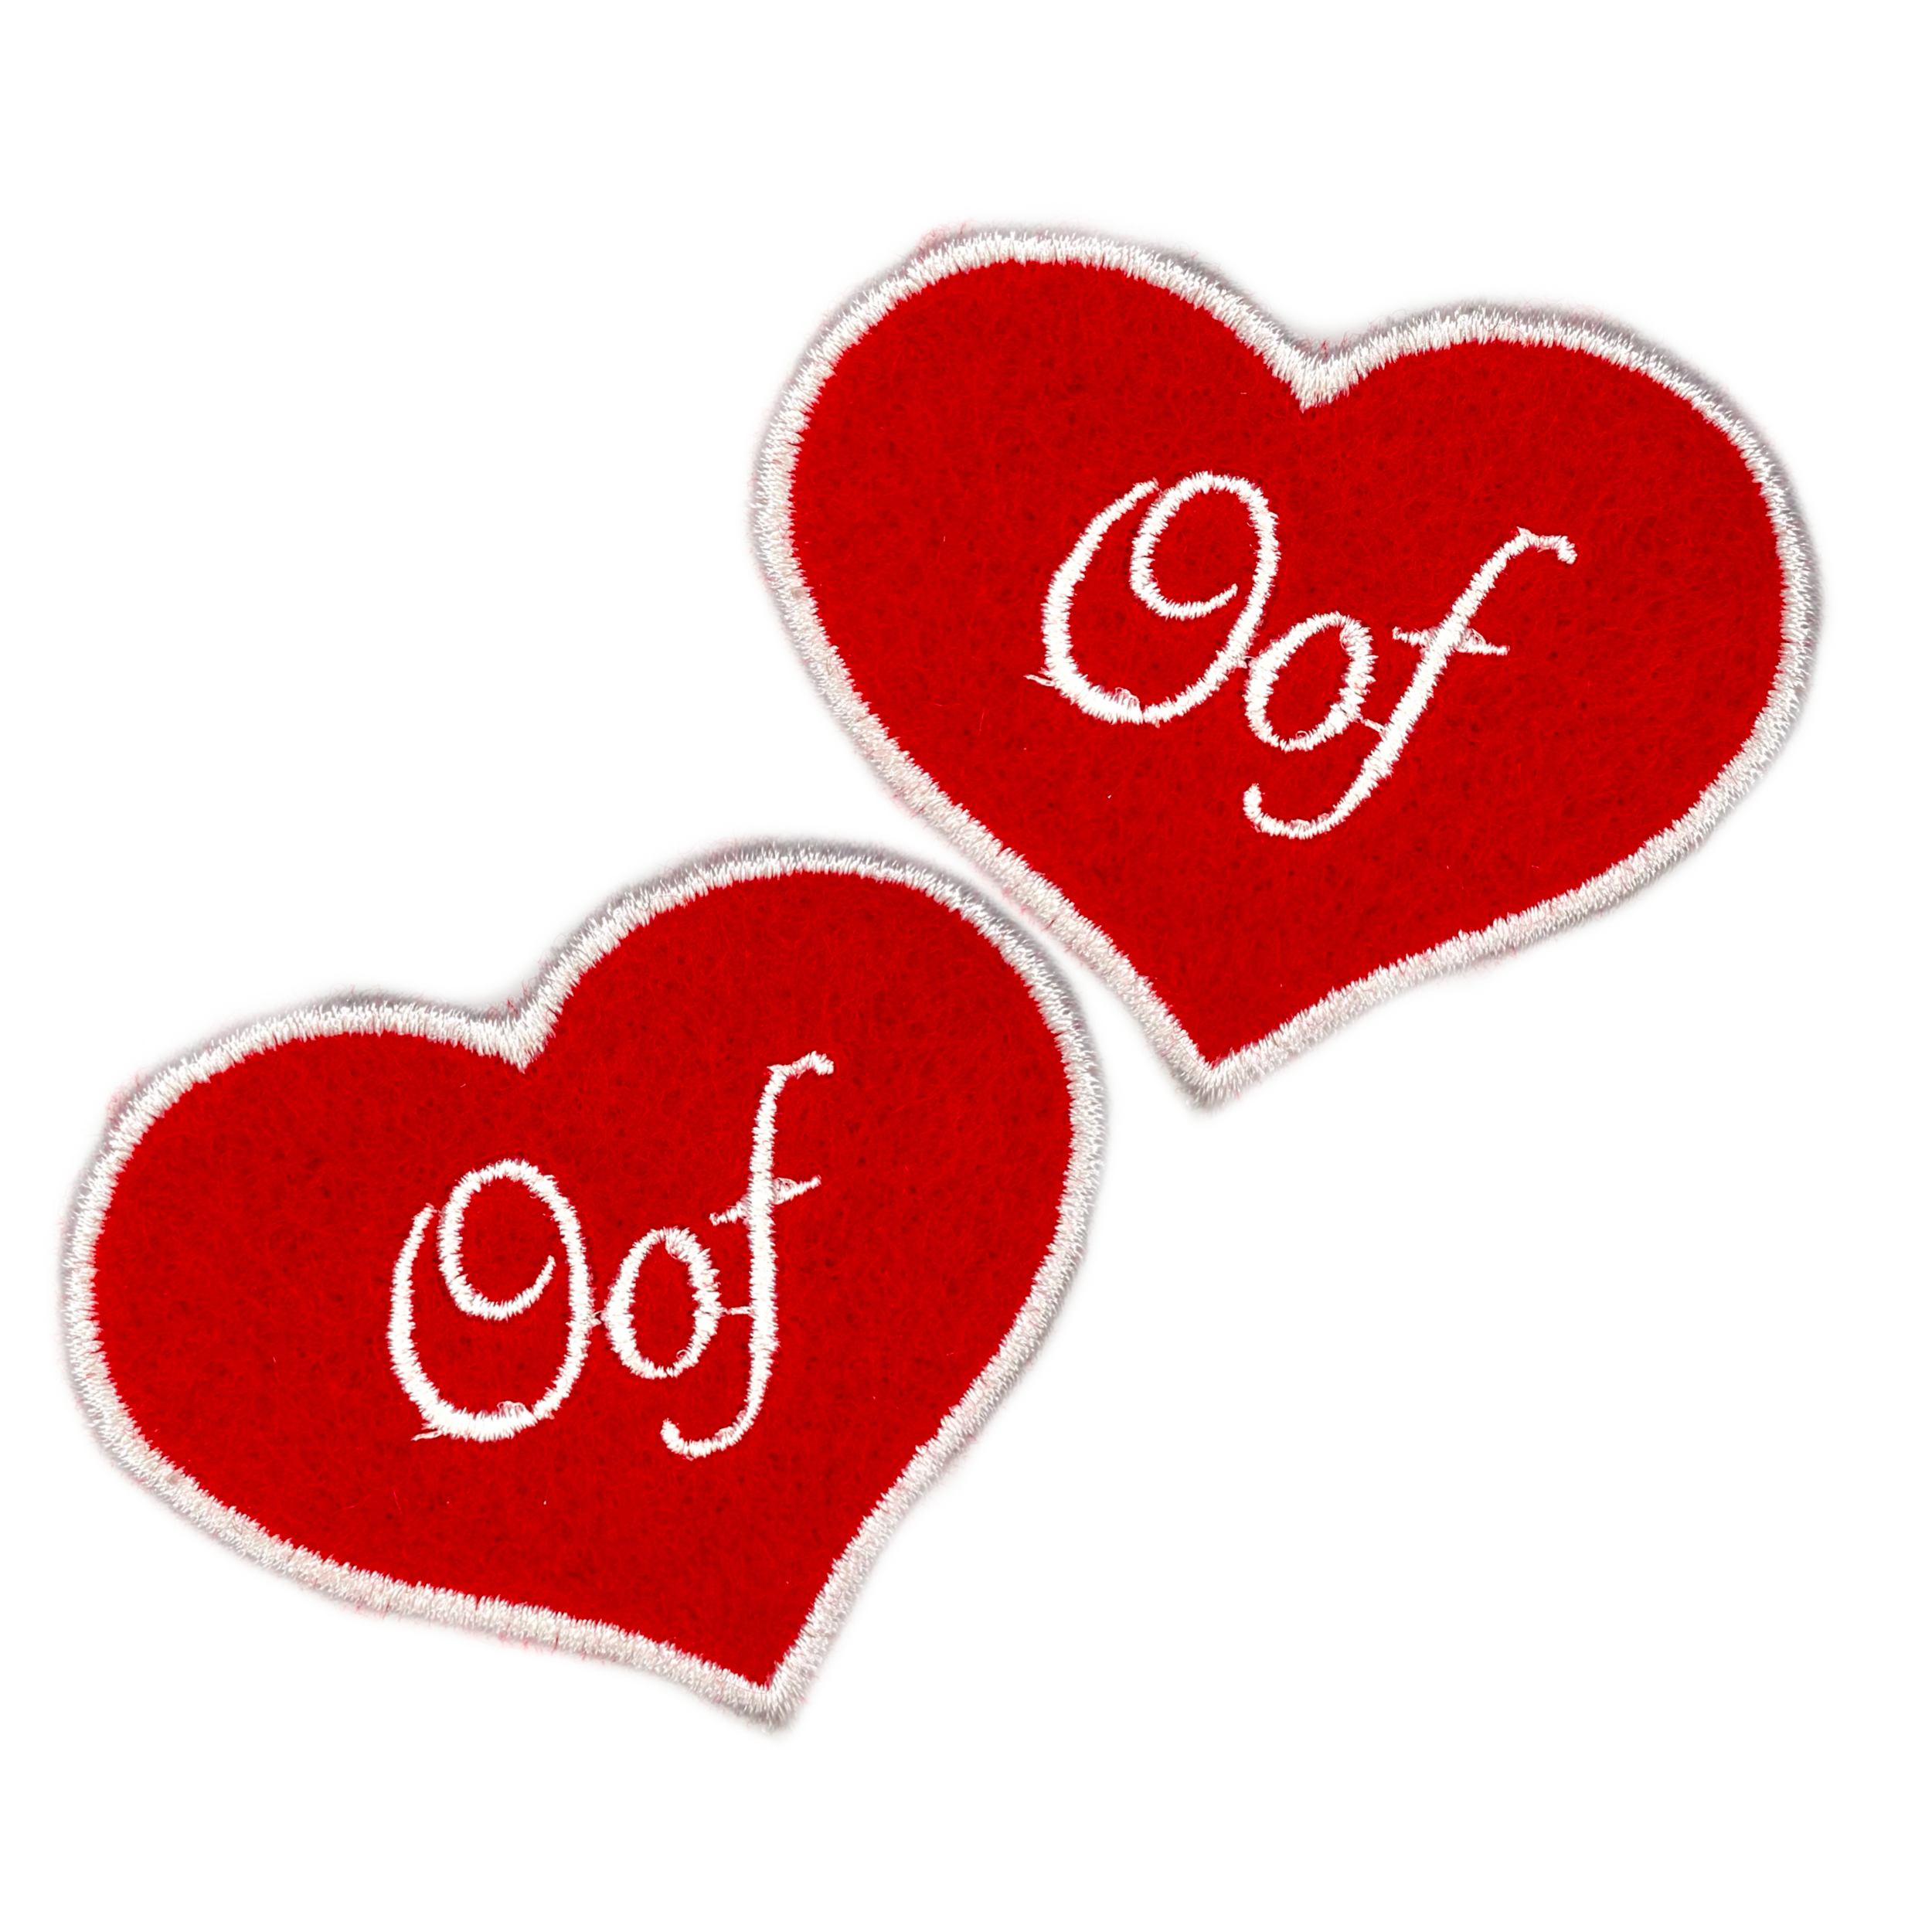 Oof Heart Embroidered Iron-on Patch - IncredibleGood Inc